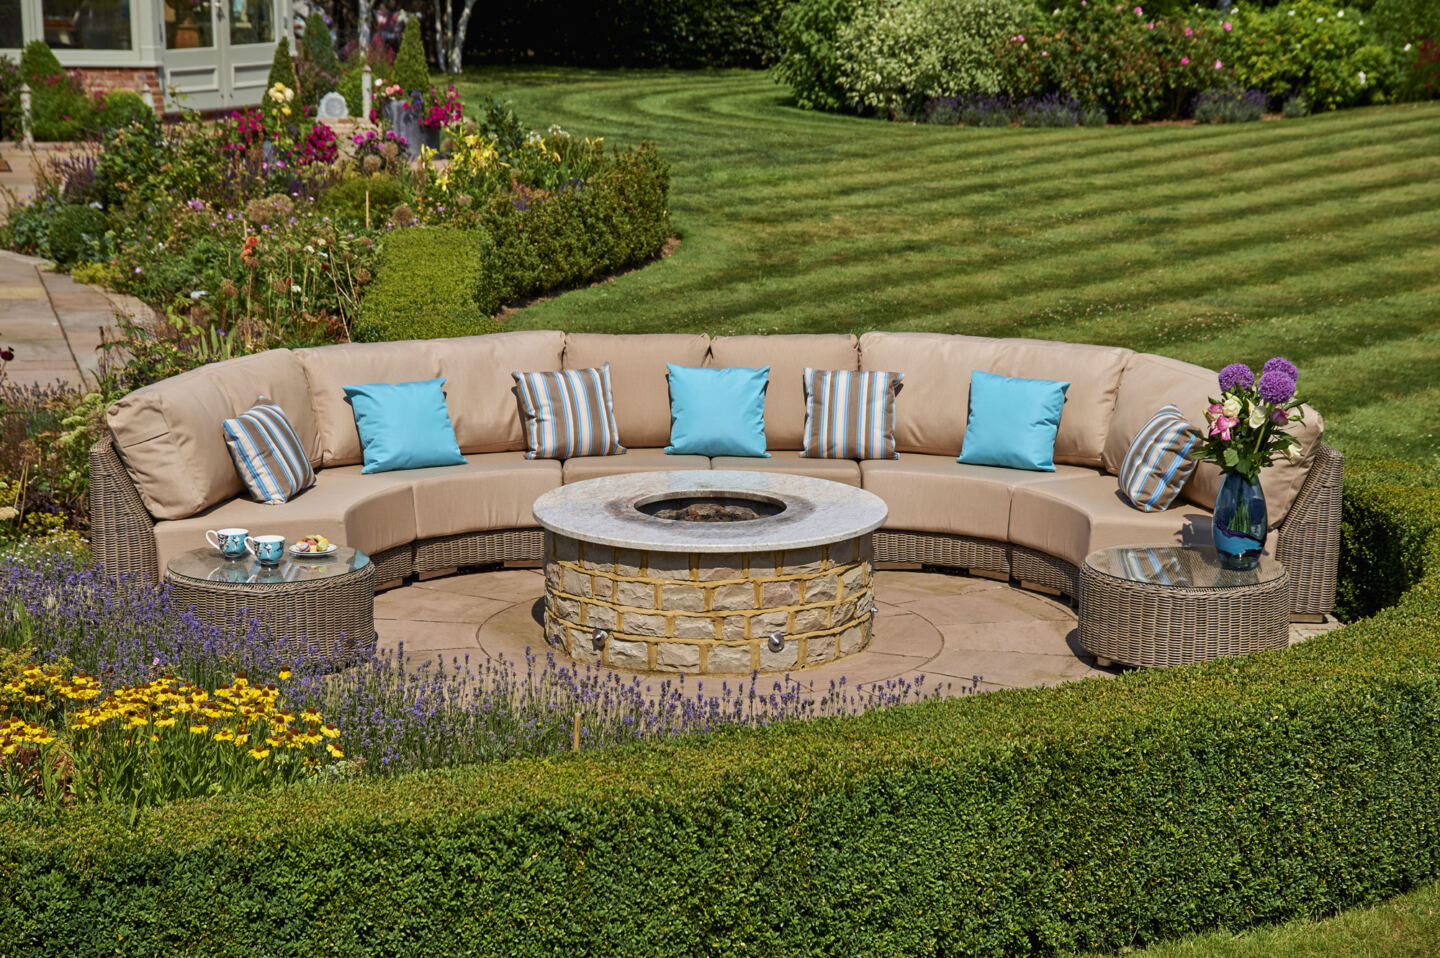 curved garden sofa positioned around a fire pit in a garden.